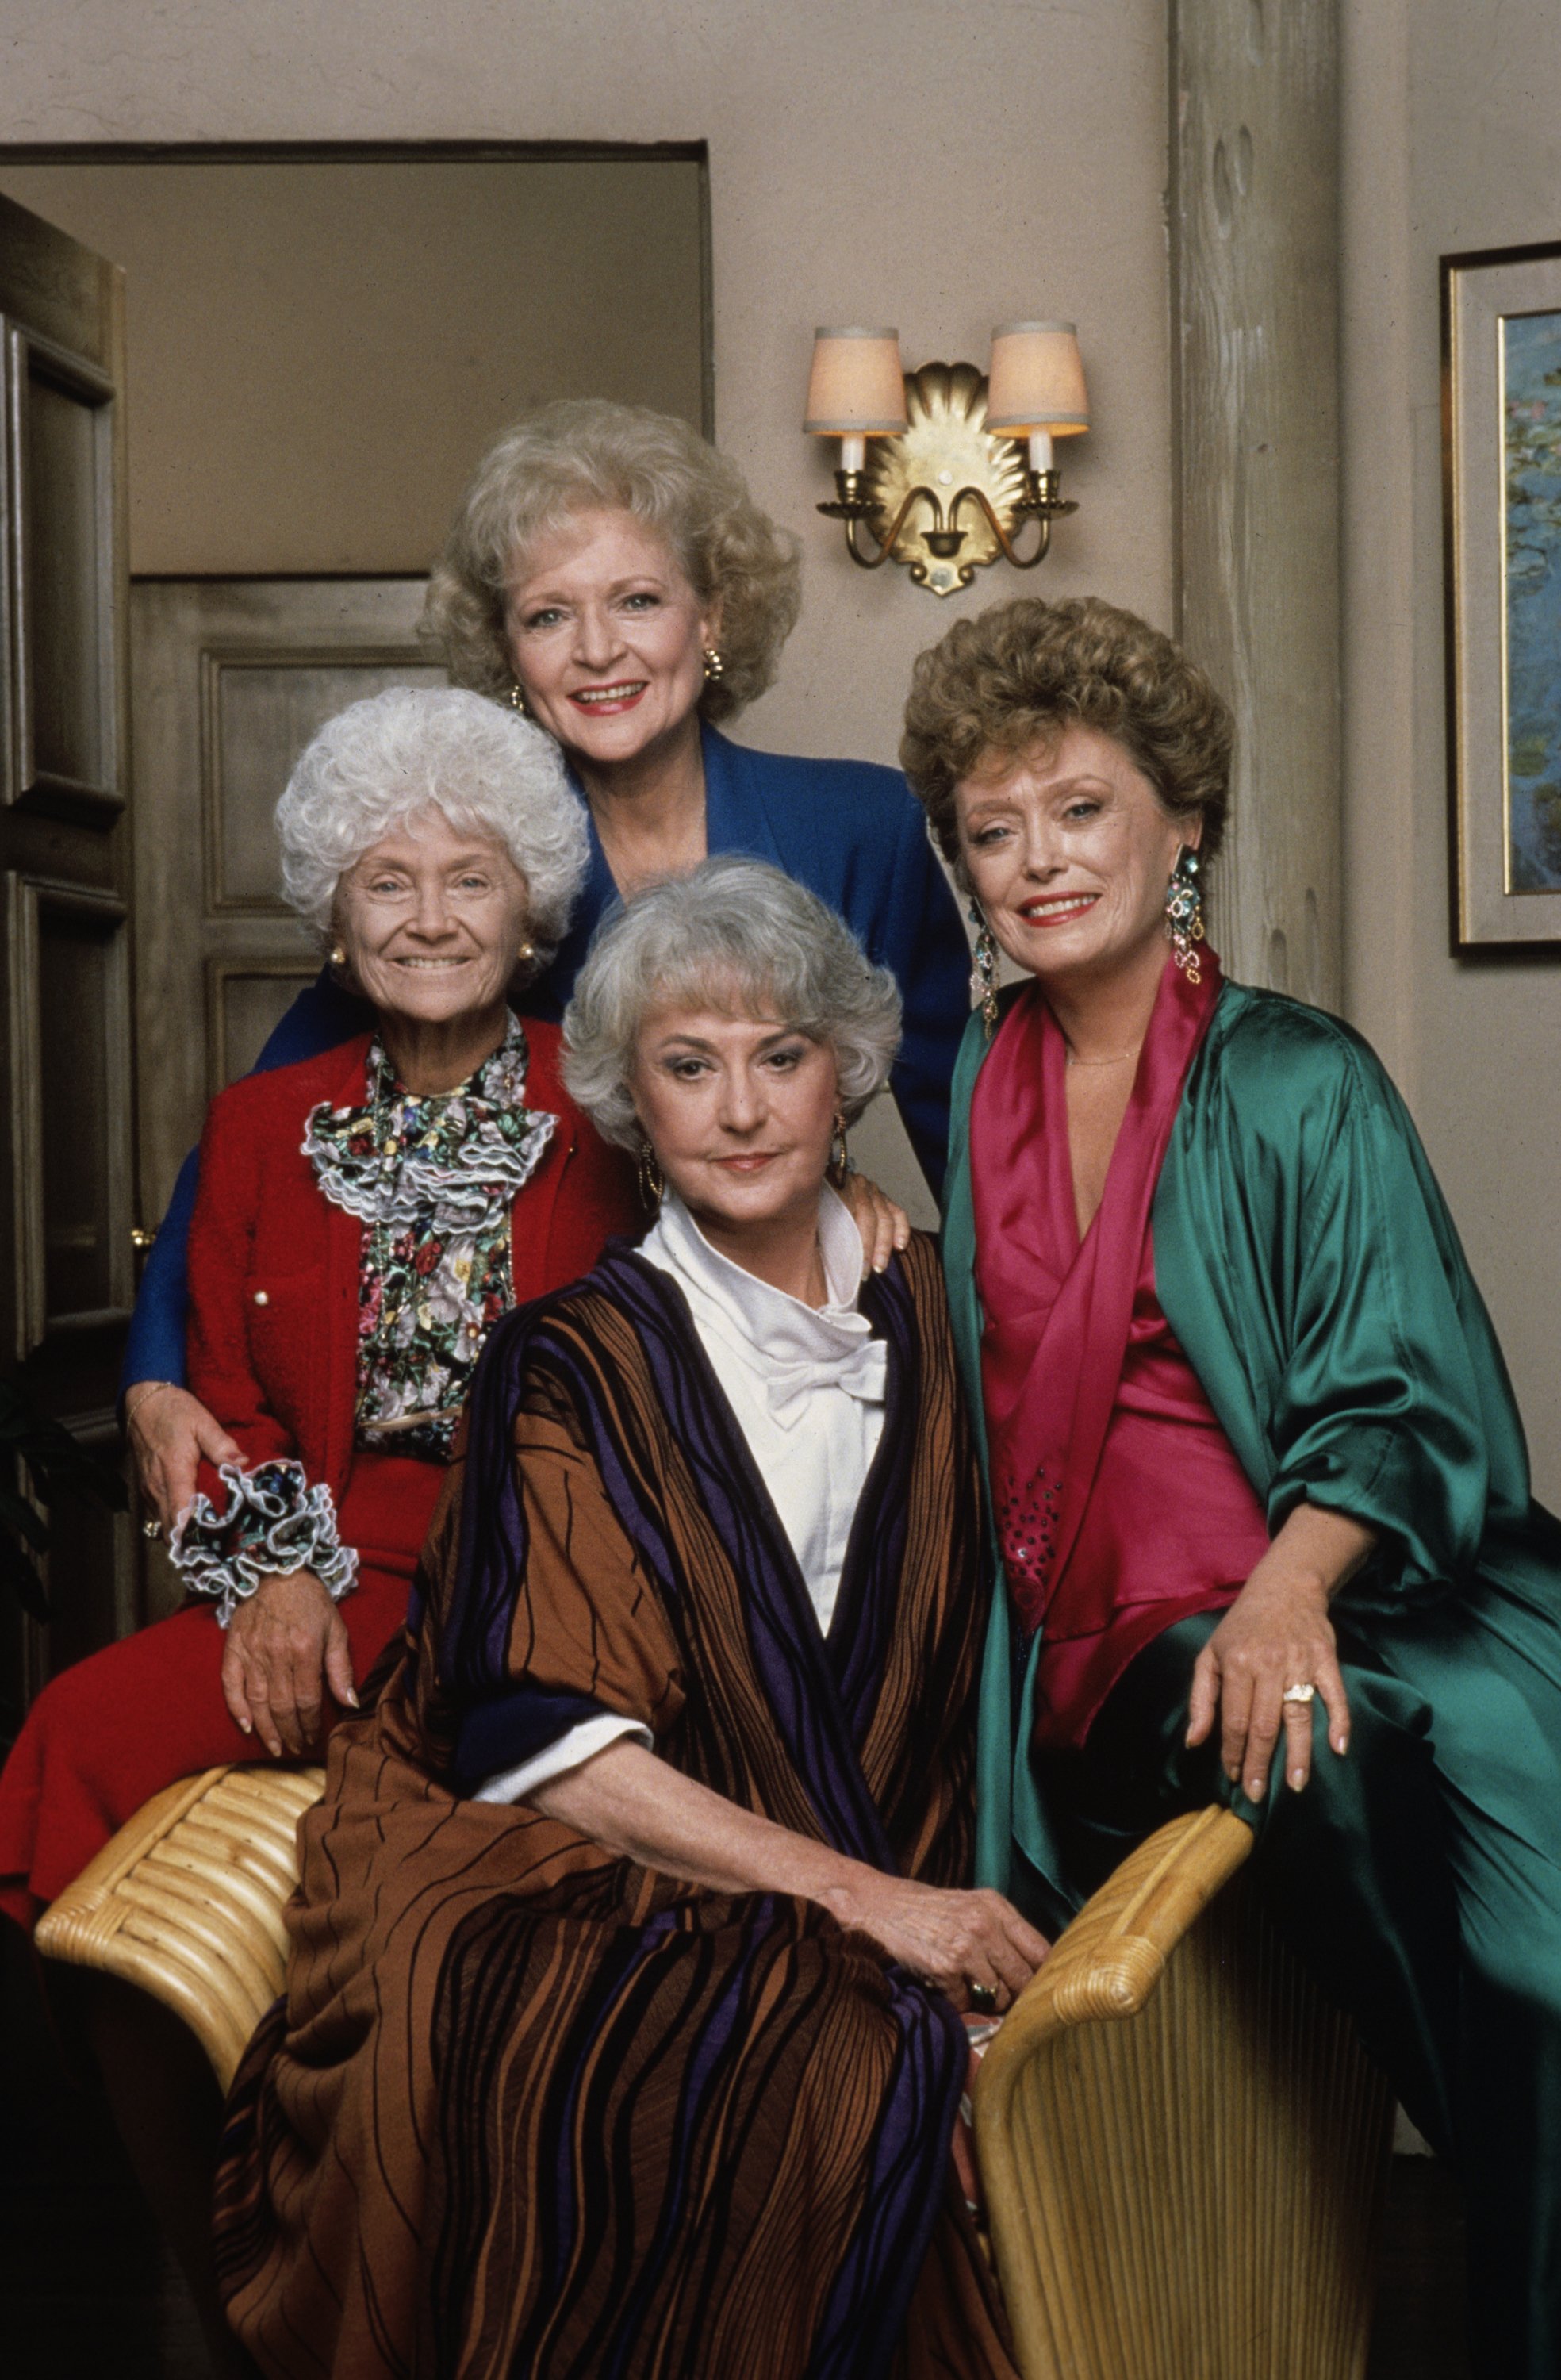 Betty White as Rose; Estelle Getty as Sophia, Rue MClanahan as Blanche; and Bea Arthur as Dorothy in "The Golden Girls." 